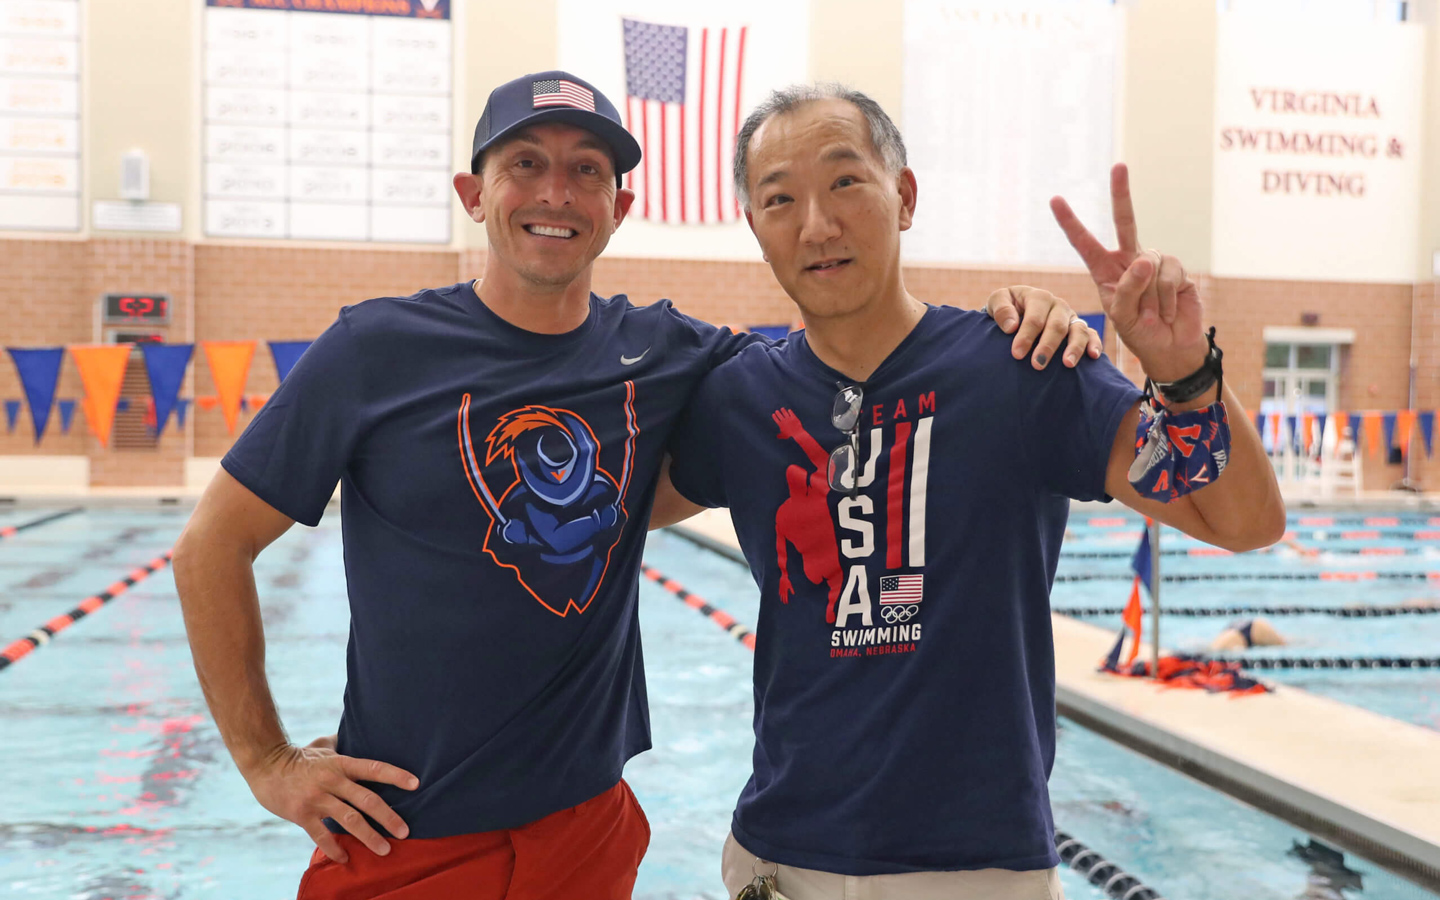 Two men wearing T-shirts posing in front of a competitive swimming pool, one giving the victory sign.